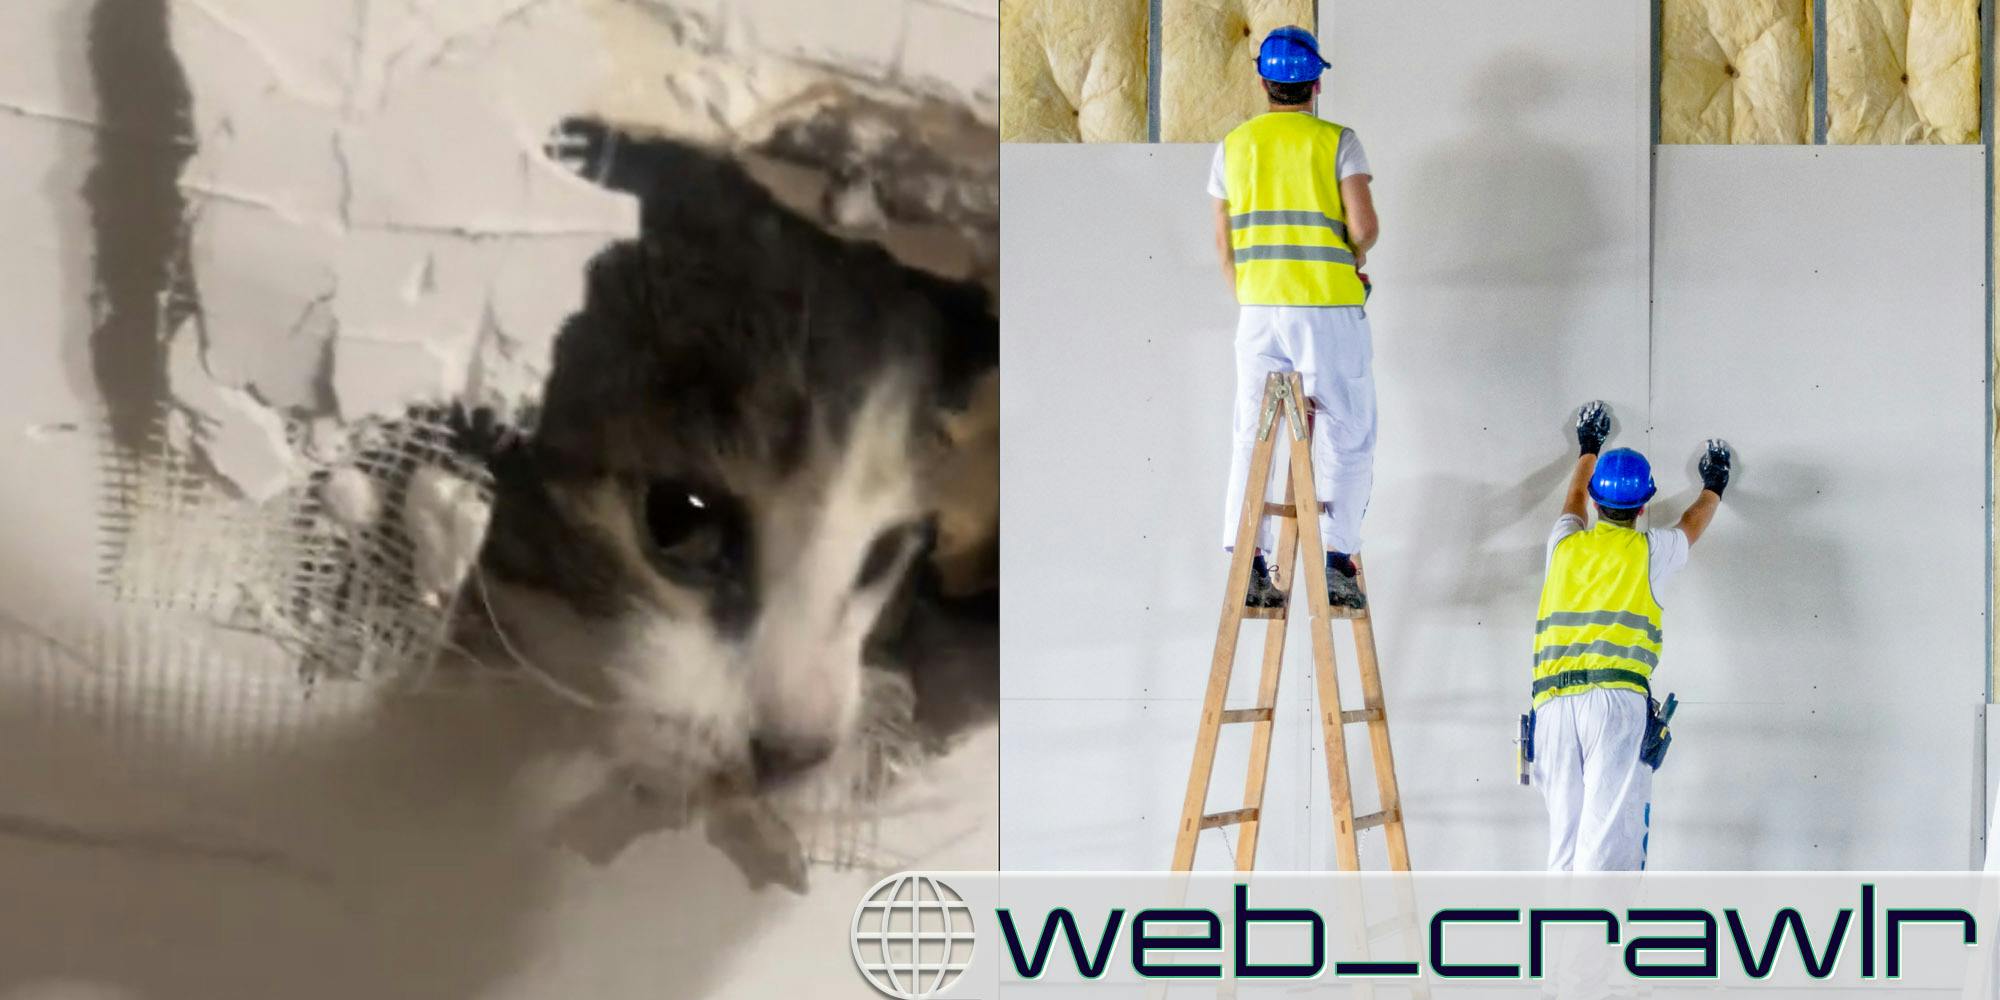 A cat poking his head through drywall. On the opposite side are workers putting up drywall. The Daily Dot newsletter web_crawlr logo is in the bottom right corner.